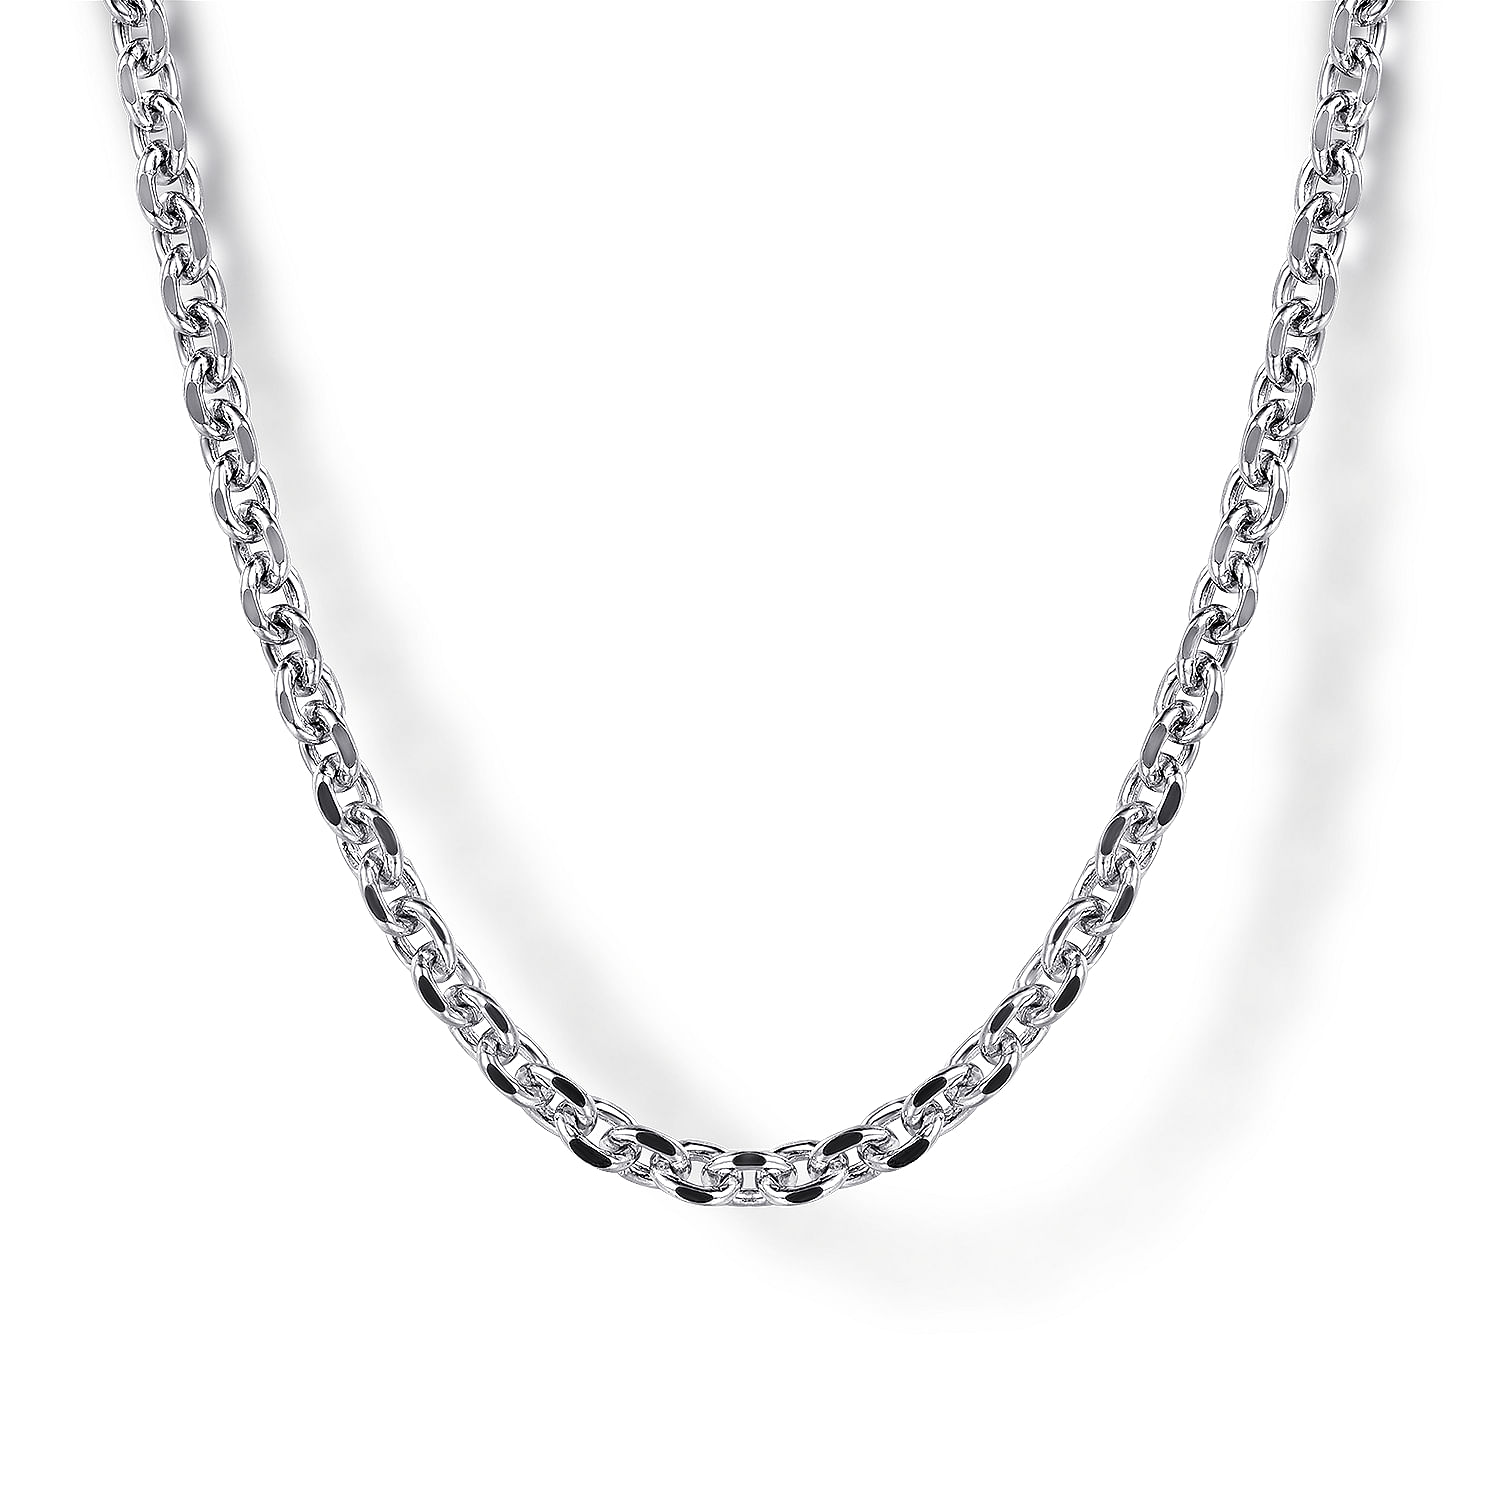 24 Inch 14K White Gold Hollow Men's Link Chain Necklace